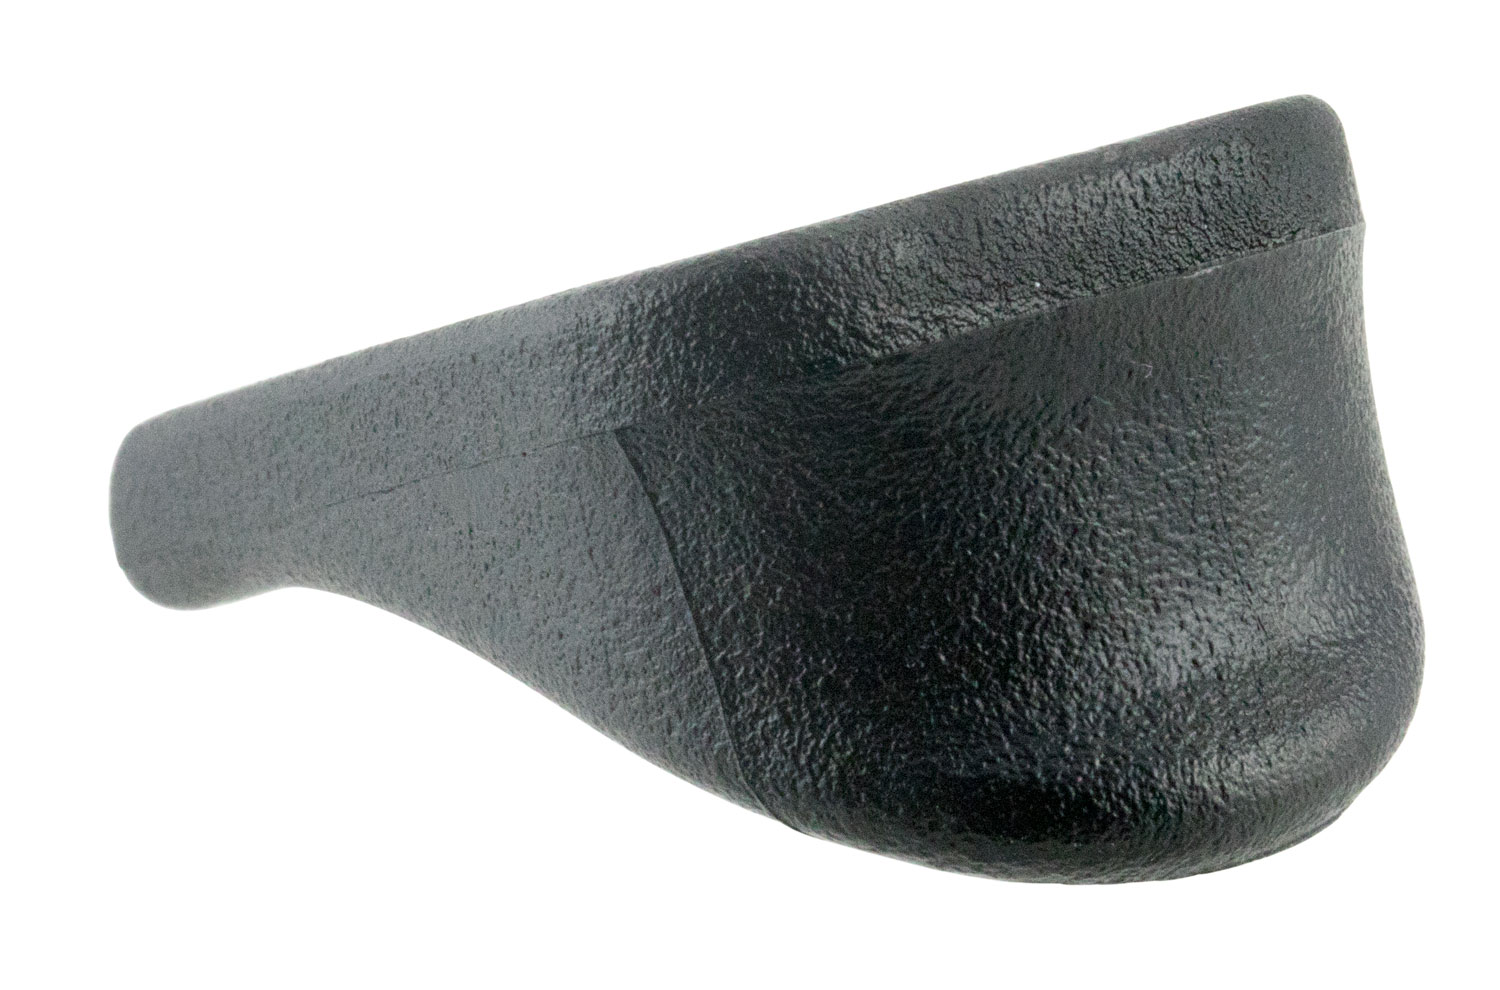 Pearce Grip PG26 Grip Extension  made of Polymer with Black Finish & 5/8